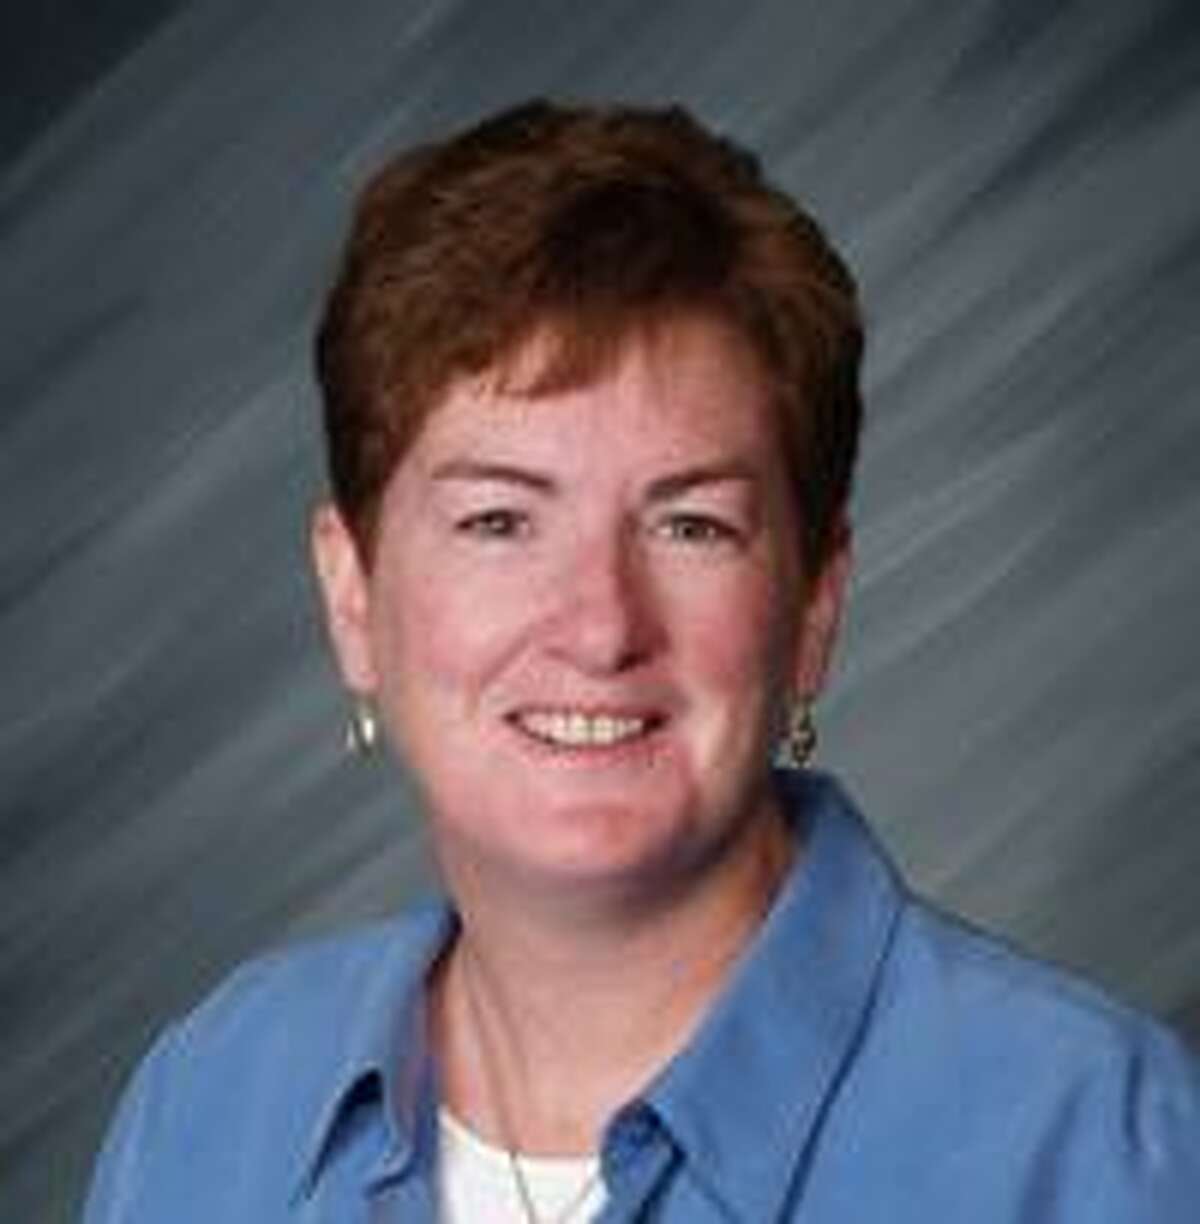 Pat Brady, who’s now principal of St. Thomas Aquinas School in Fairfield, has been named head of the new Catholic Academy of Stamford.